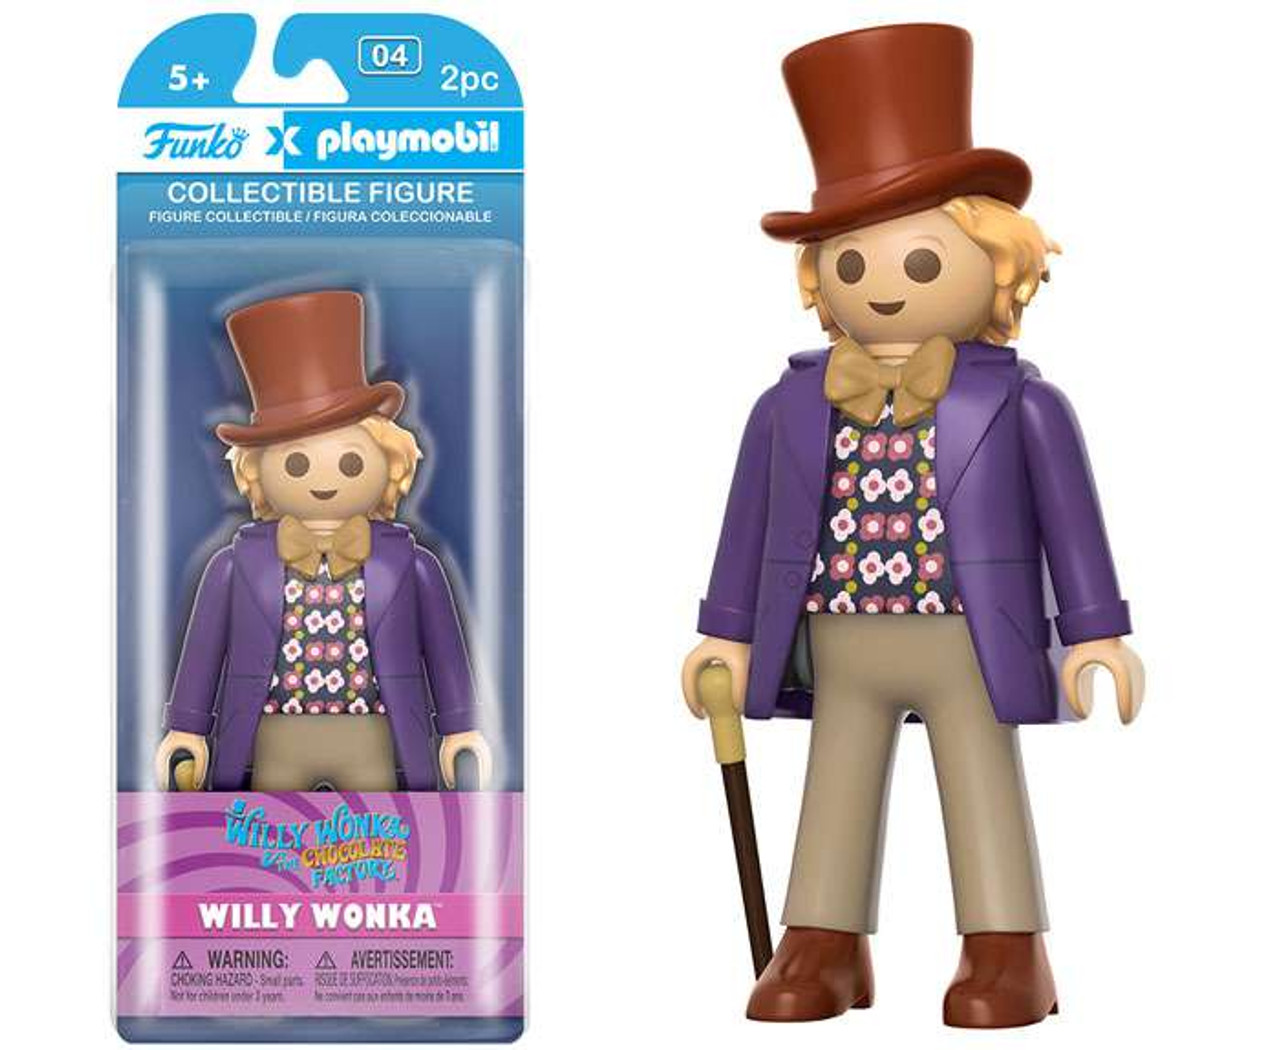 Funko Charlie And The Chocolate Factory Funko Playmobil Willy Wonka Action Figure Toywiz - freddy goes boom roblox charlie charlie